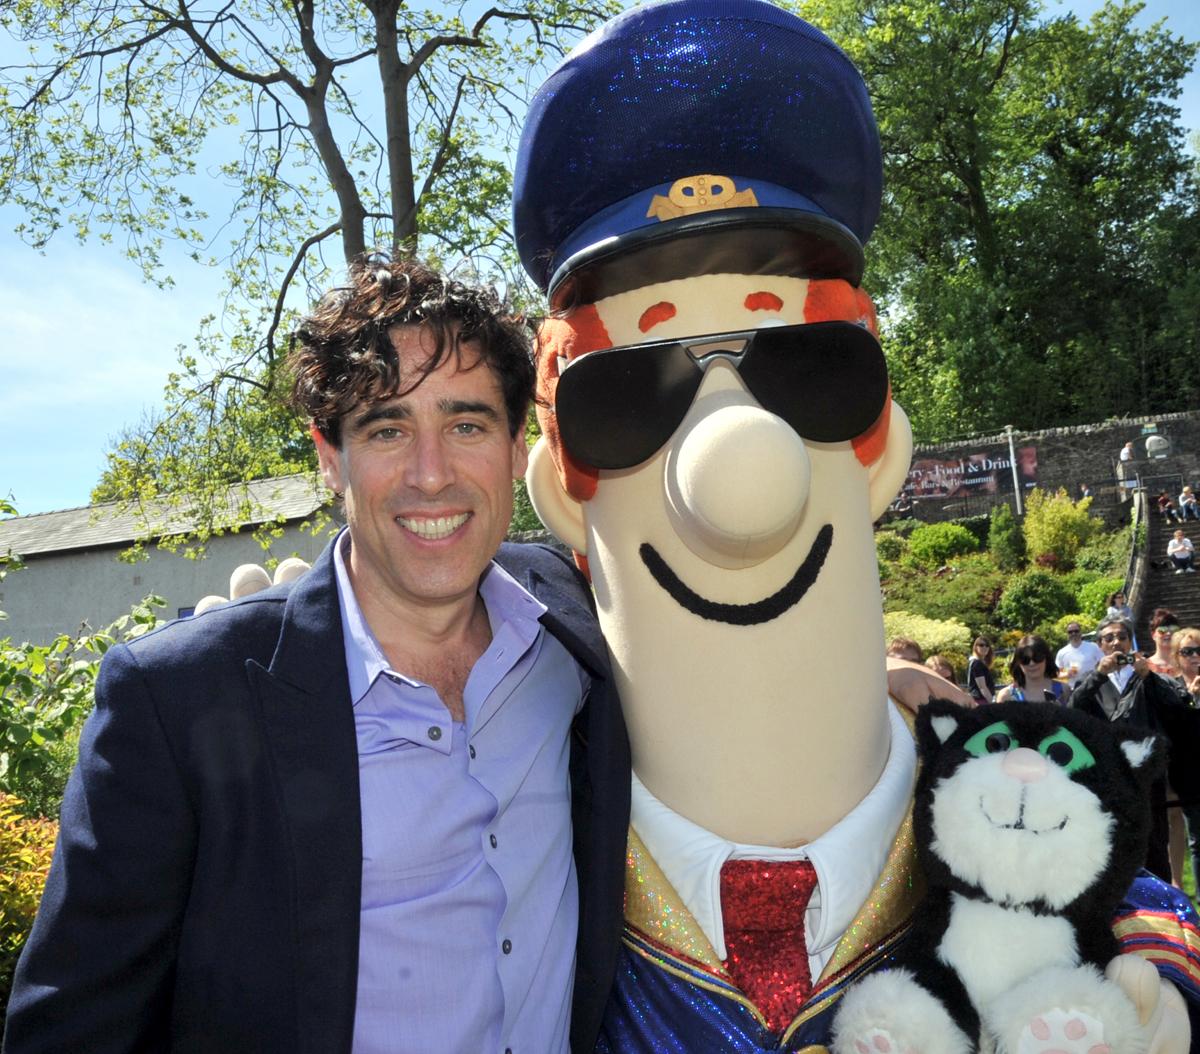 A Special gala screening of Postman Pat was held at The Brewery in Kendal. The voice of Postman Pat Stephen Mangan turned up to the days events.